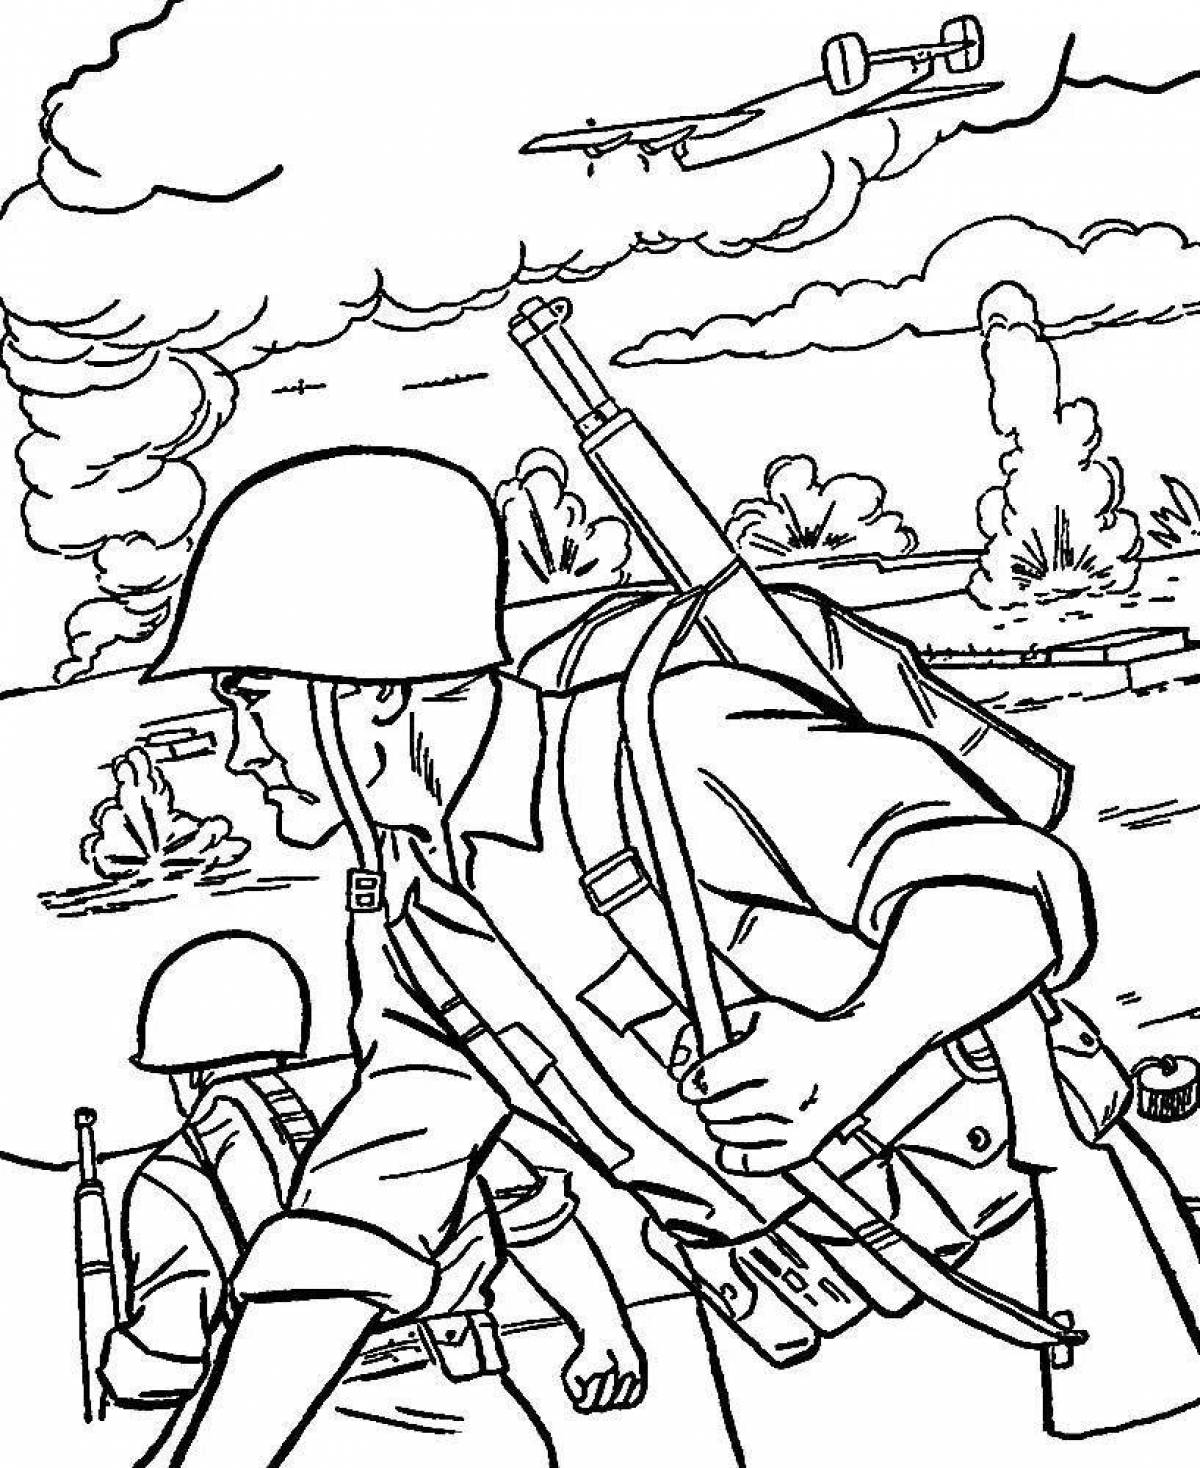 Scenic military coloring for children 6-7 years old